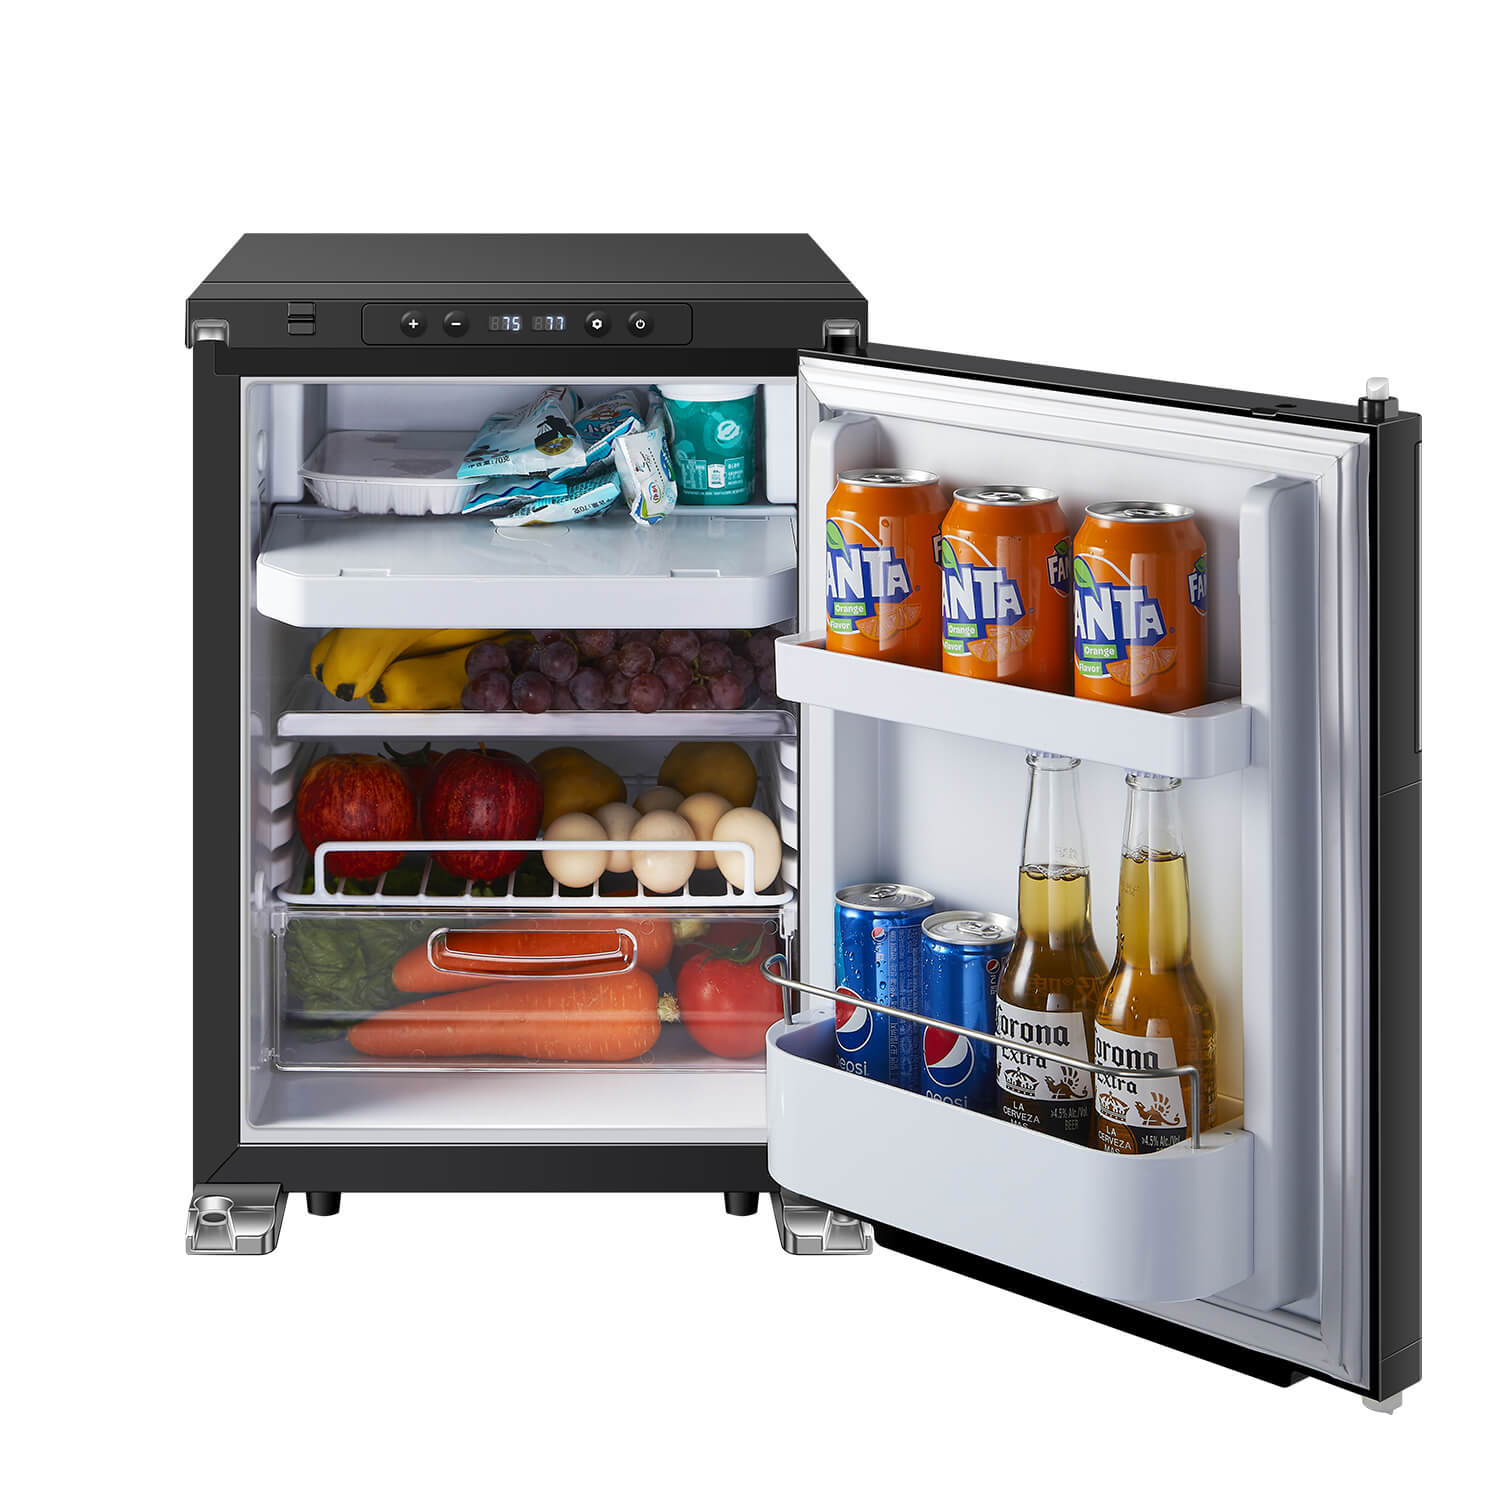 Bodega R50 Cooler Review: A 12-Volt, 45-Liter Smart Refrigerator and  Freezer That's Perfect for Long Trips, Camping, and RV Use